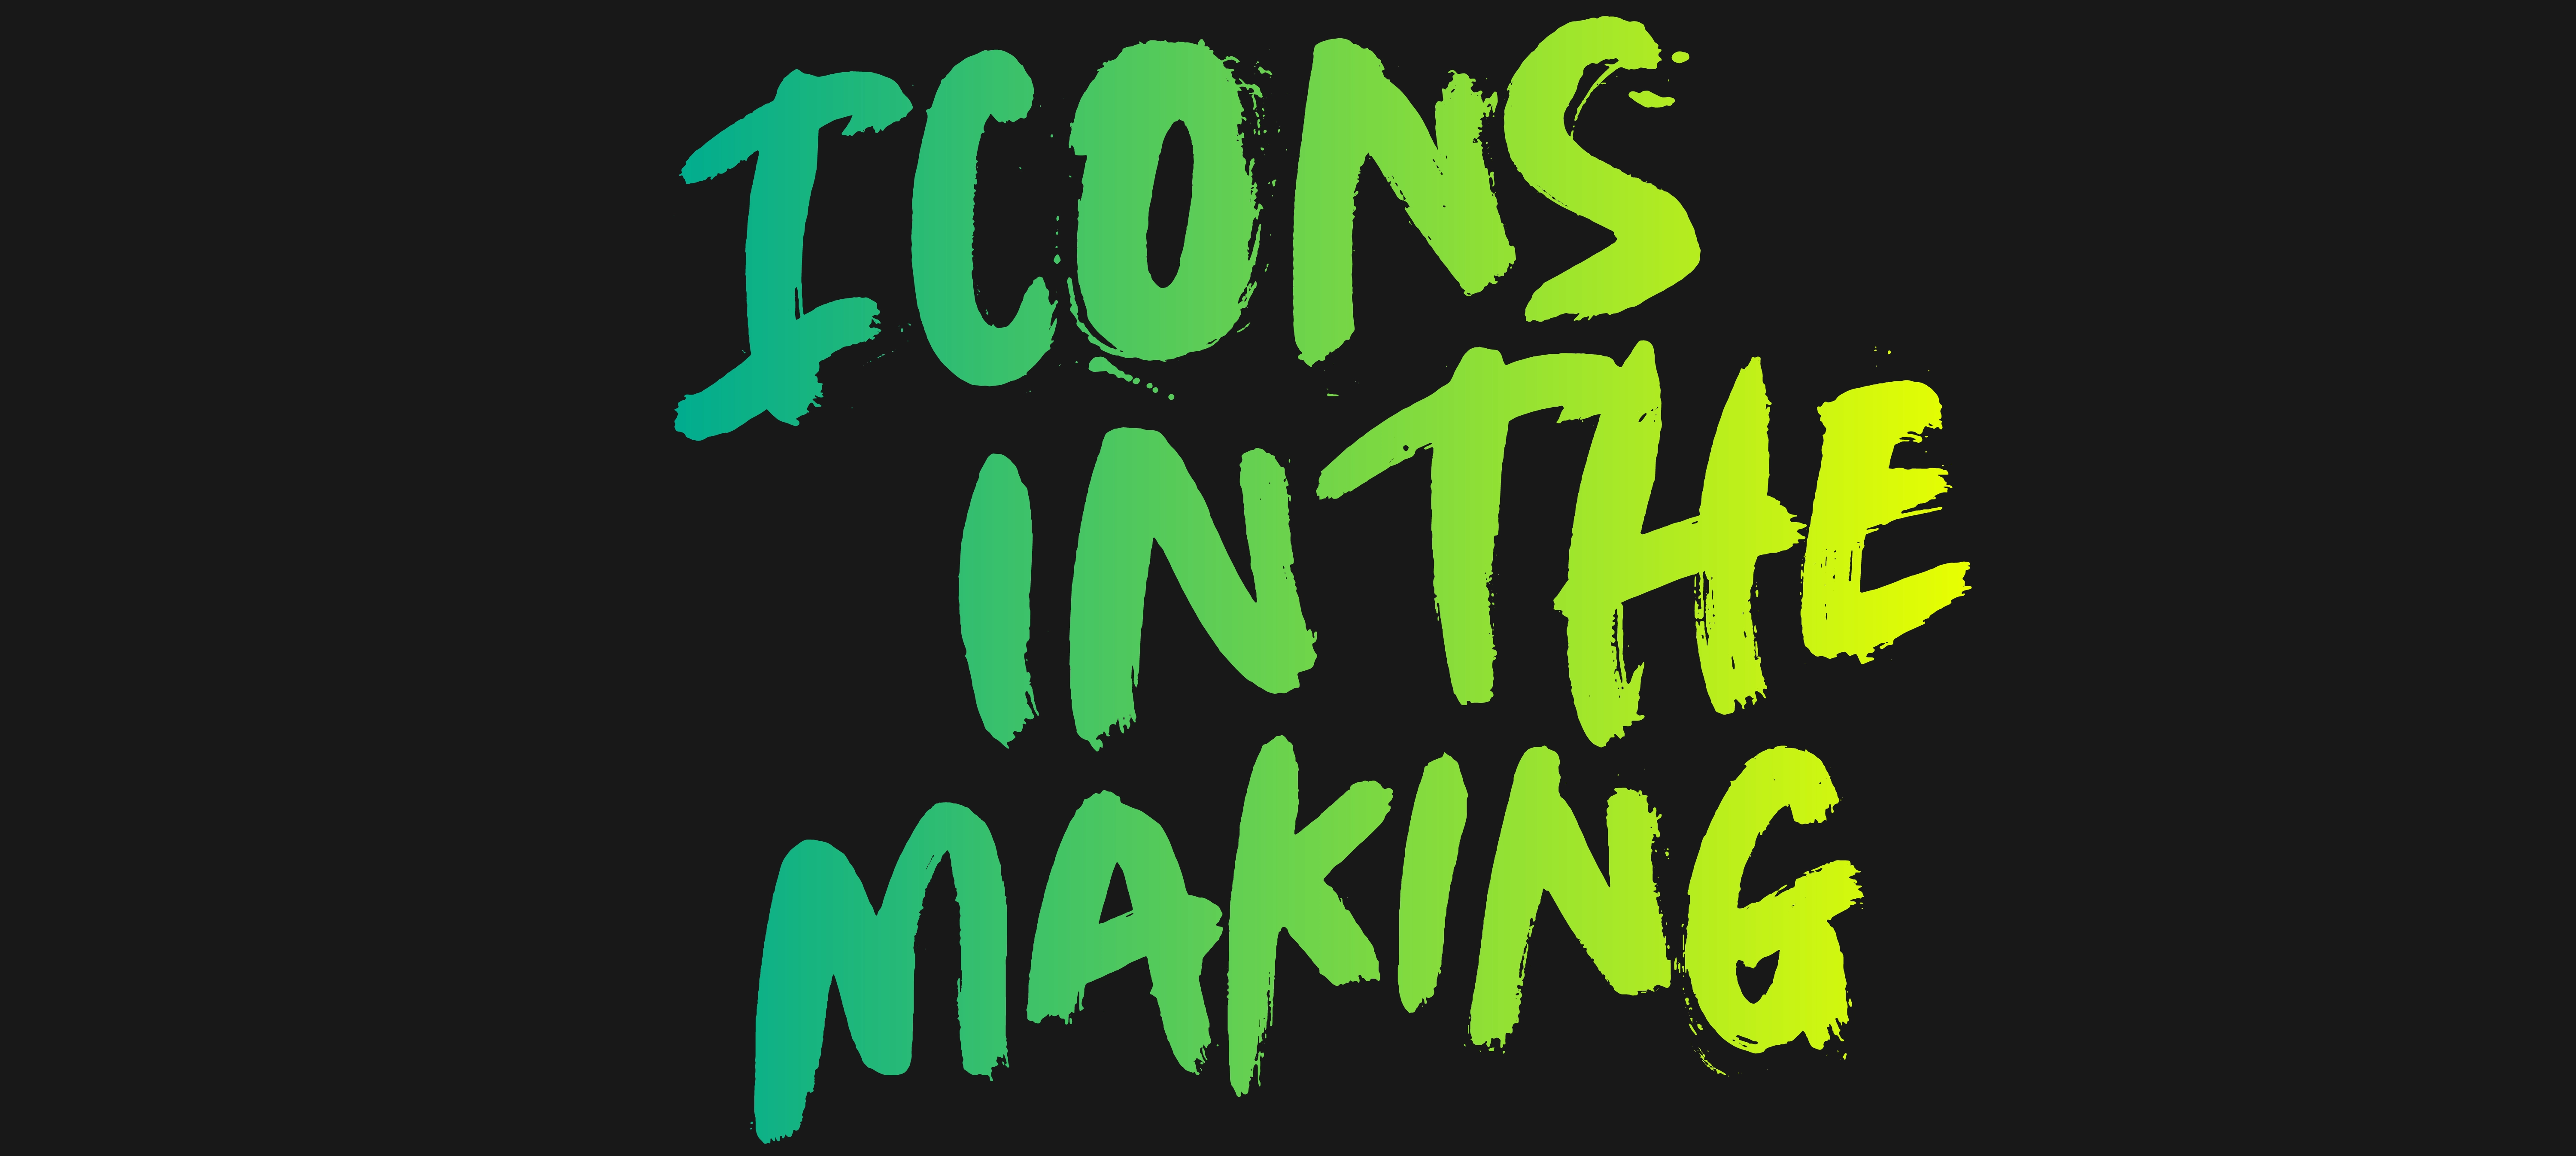 Icons in the making podcast logo